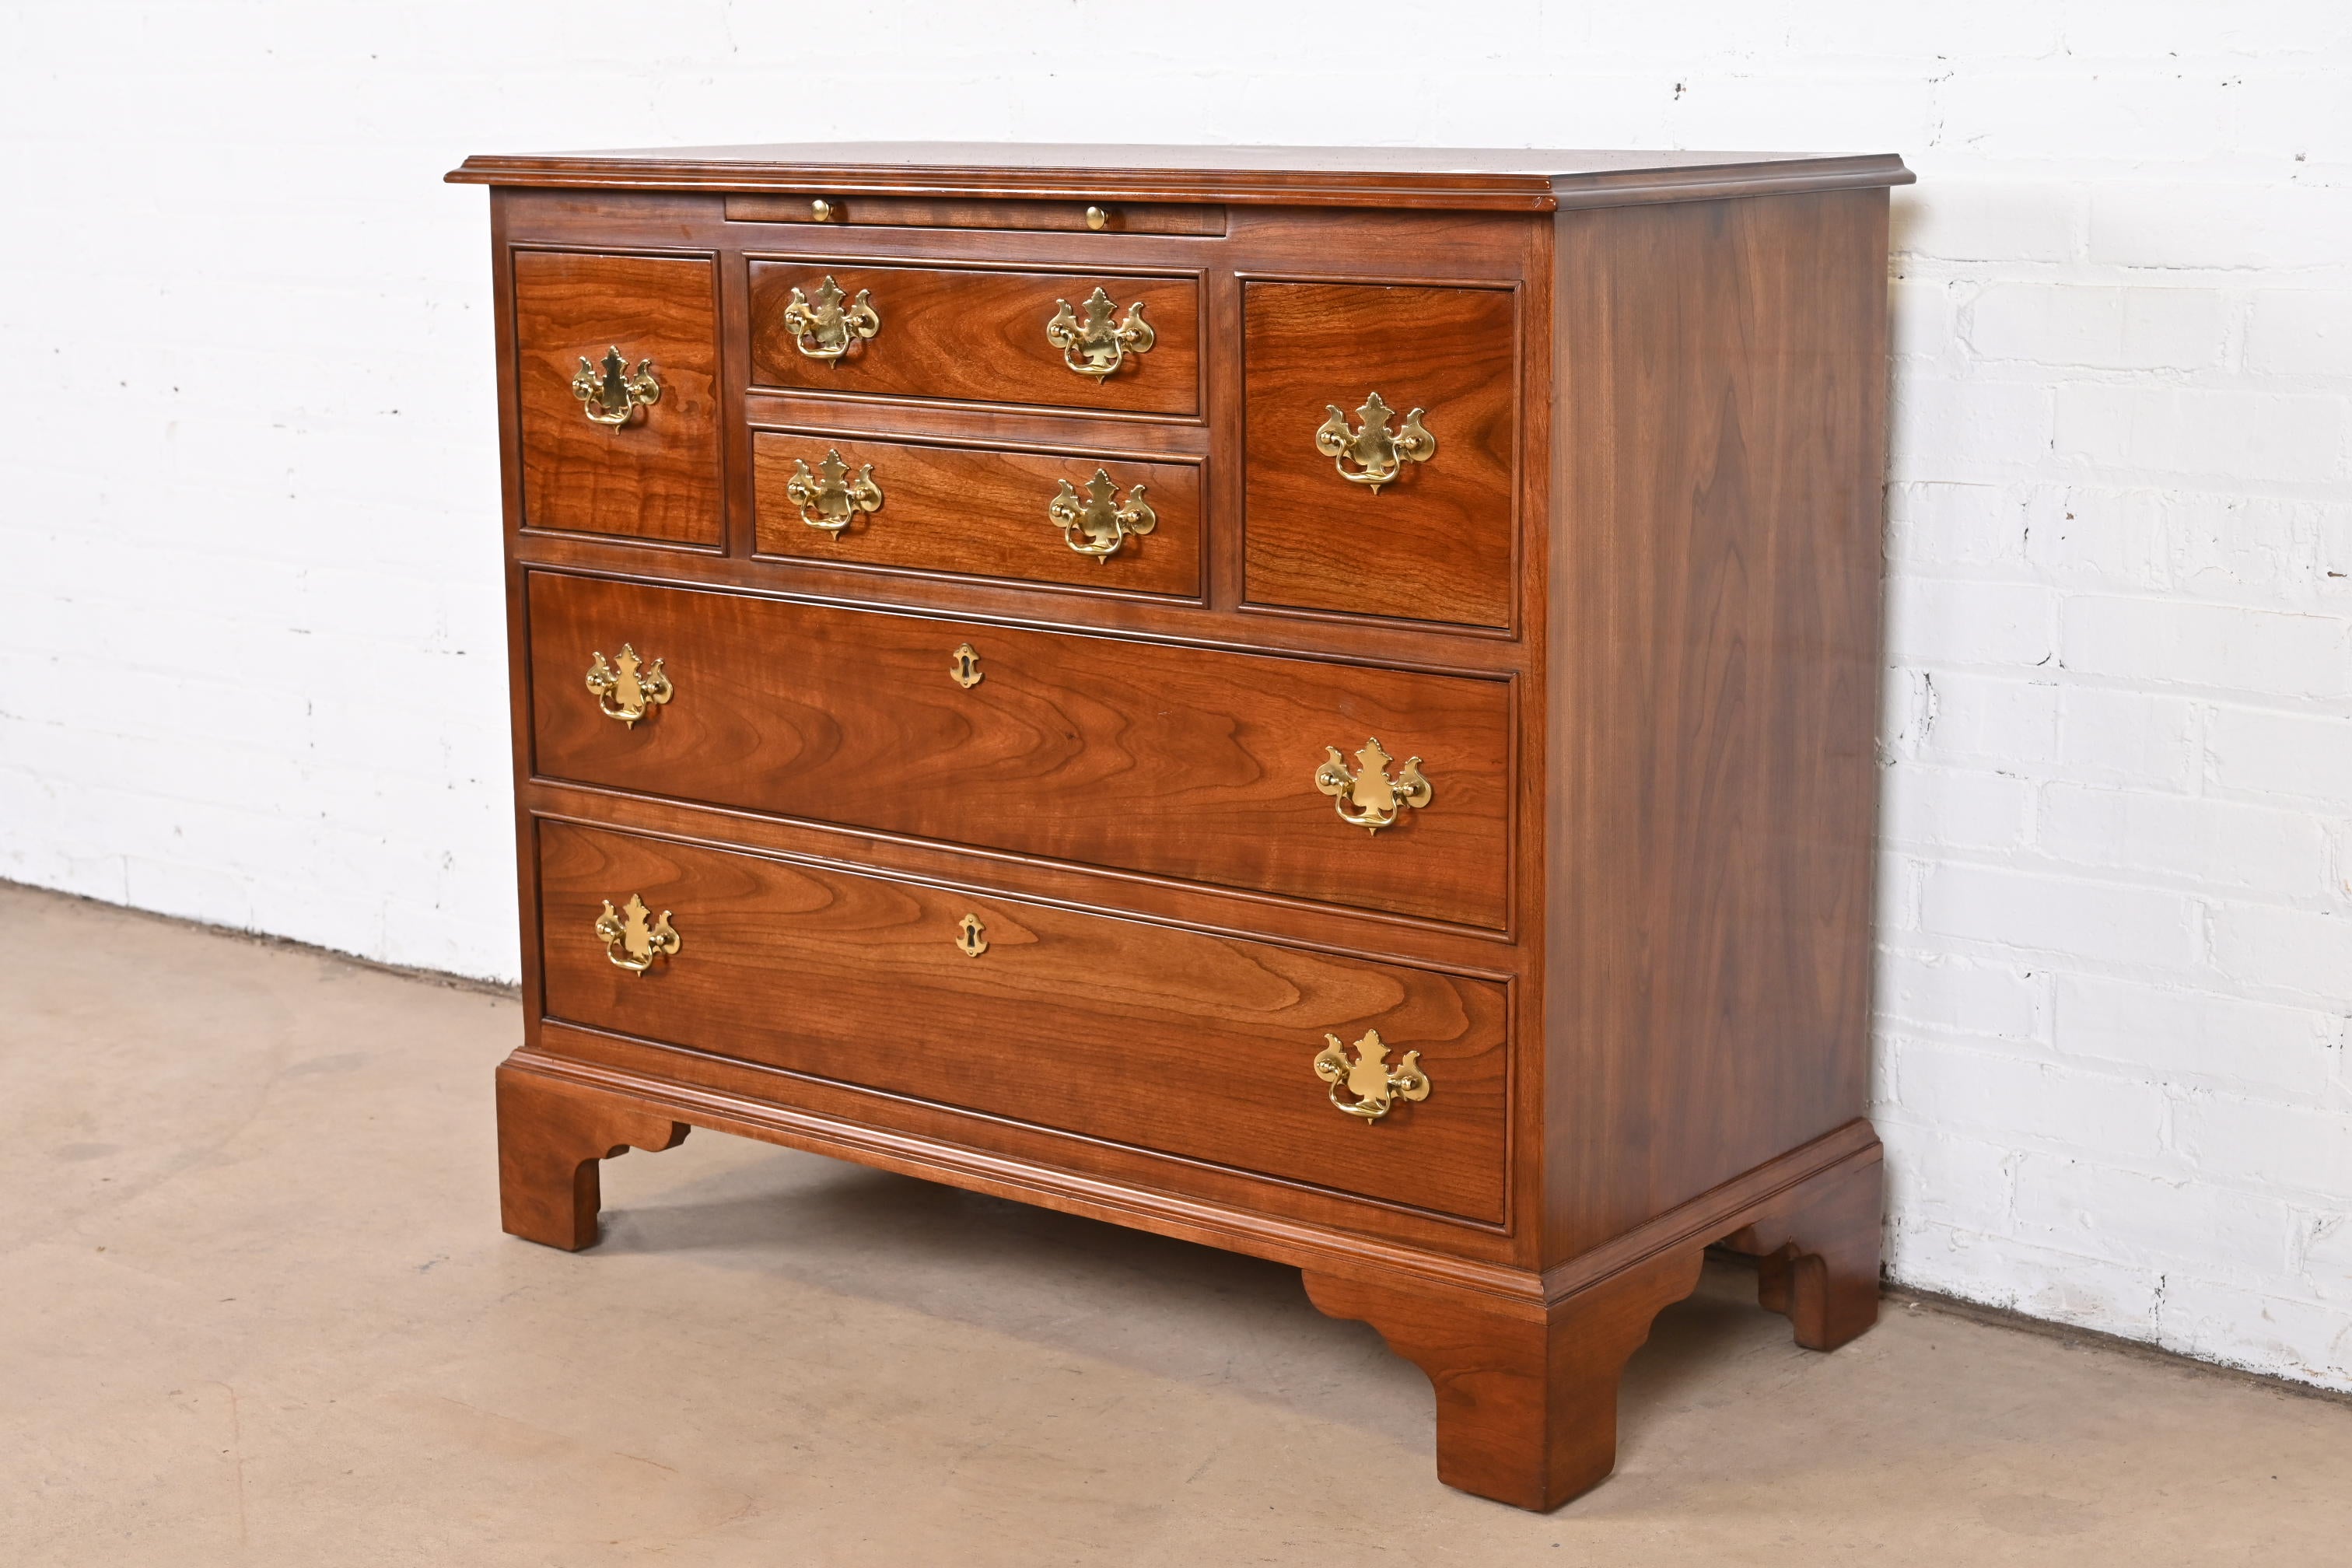 A gorgeous American Colonial or Georgian style bachelor chest or dresser

By L. & J.G. Stickley

USA, late 20th century

Solid cherry wood, withe original brass hardware.

Measures: 38